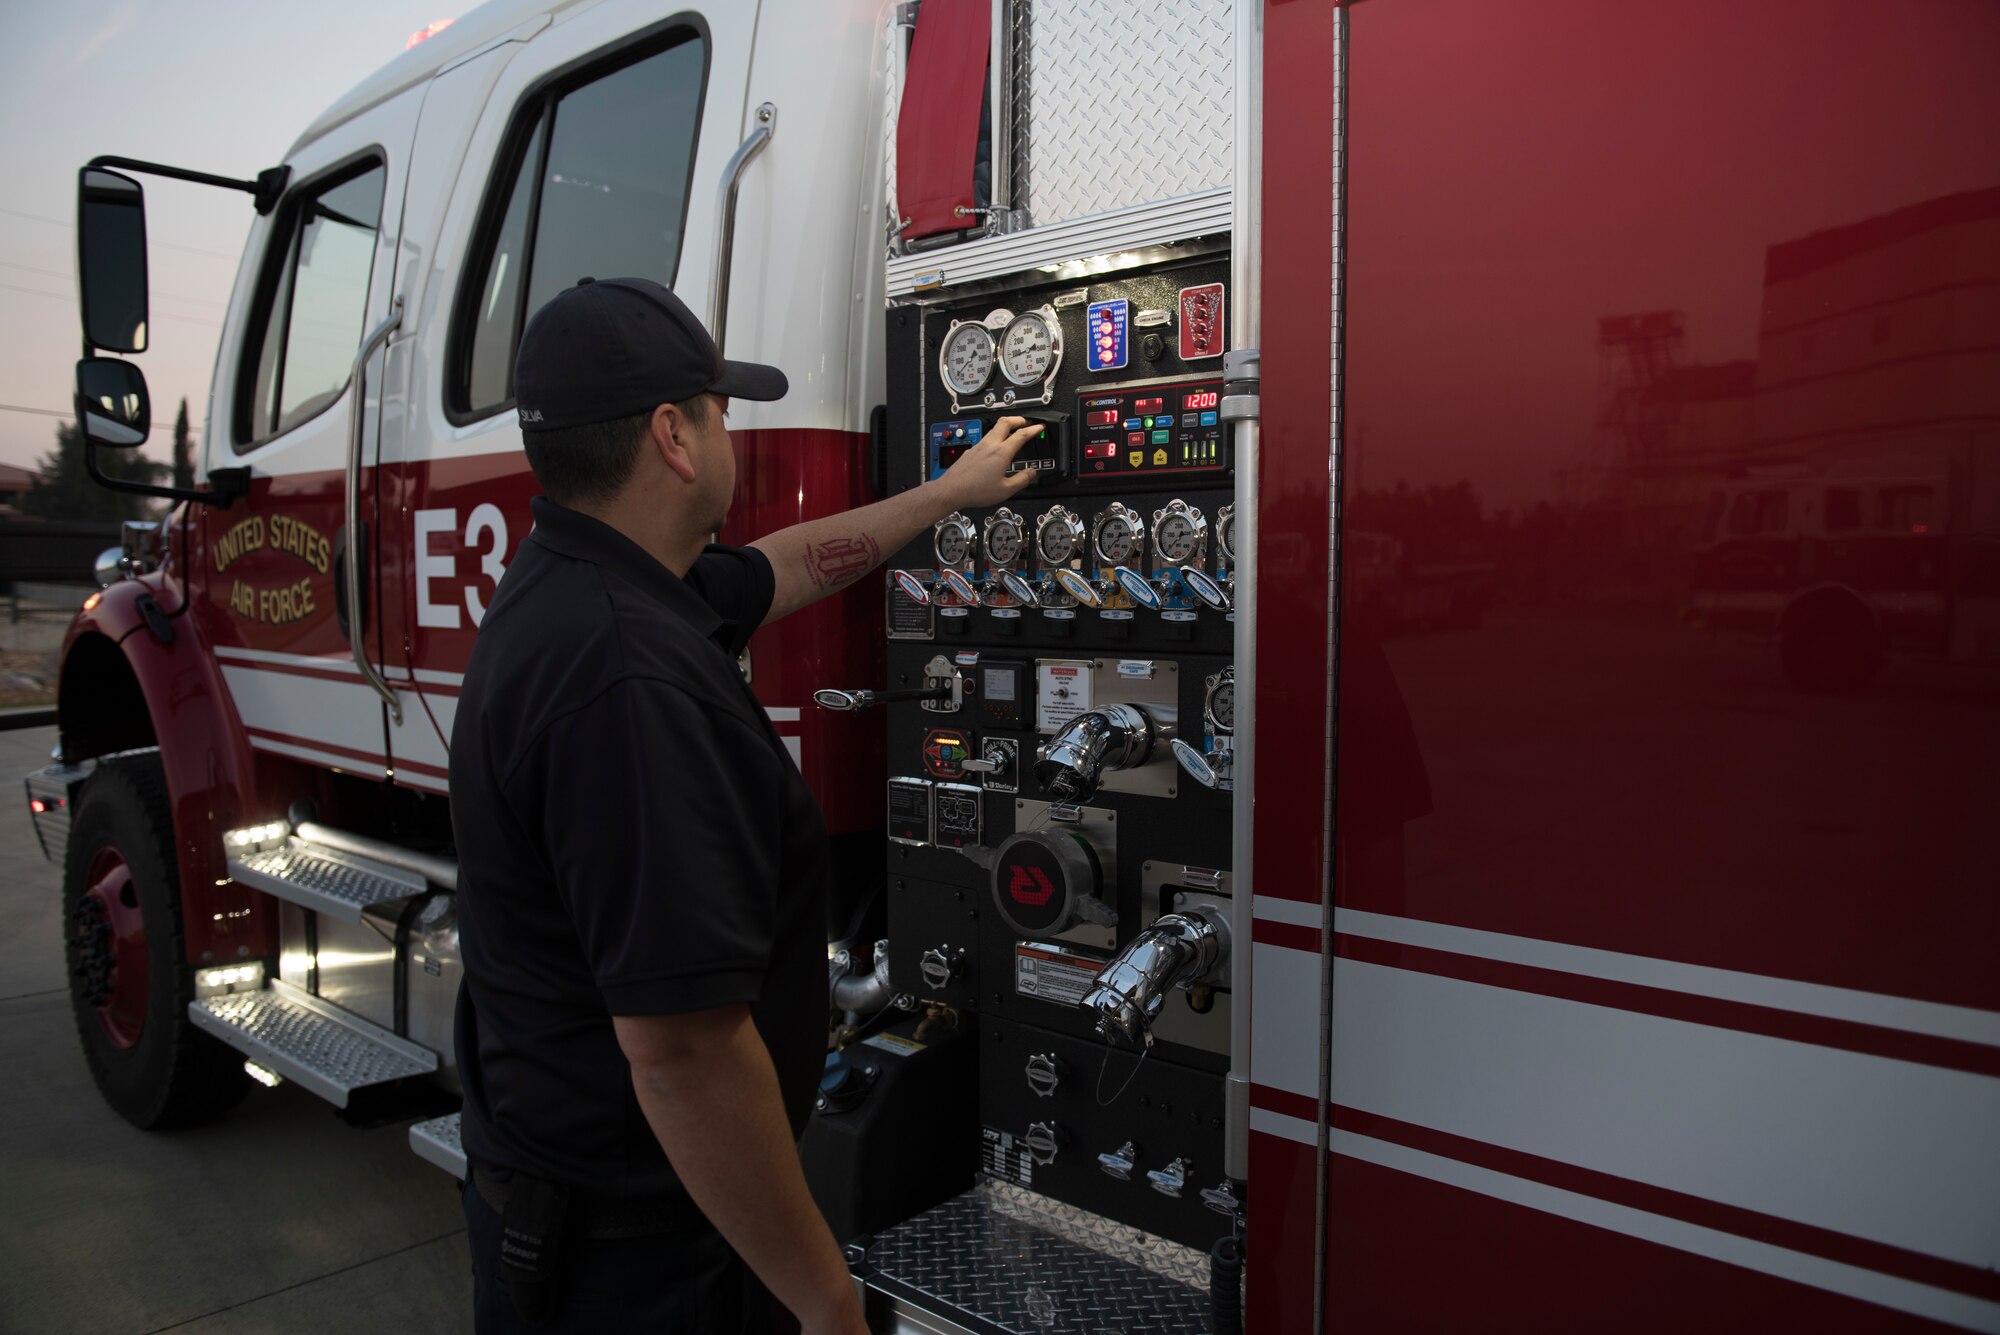 David Silva, 60th Civil Engineer Squadron Fire and Emergency Services flight engineer, conducts a check on equipment outside a firetruck Oct. 29, 2019, at Travis Air Force Base, California. With the start of every shift, the FES flight conducts inspections on more than 1,000 items including vehicles, protective equipment and hardware. (U.S. Air Force photo by Tech. Sgt. James Hodgman)